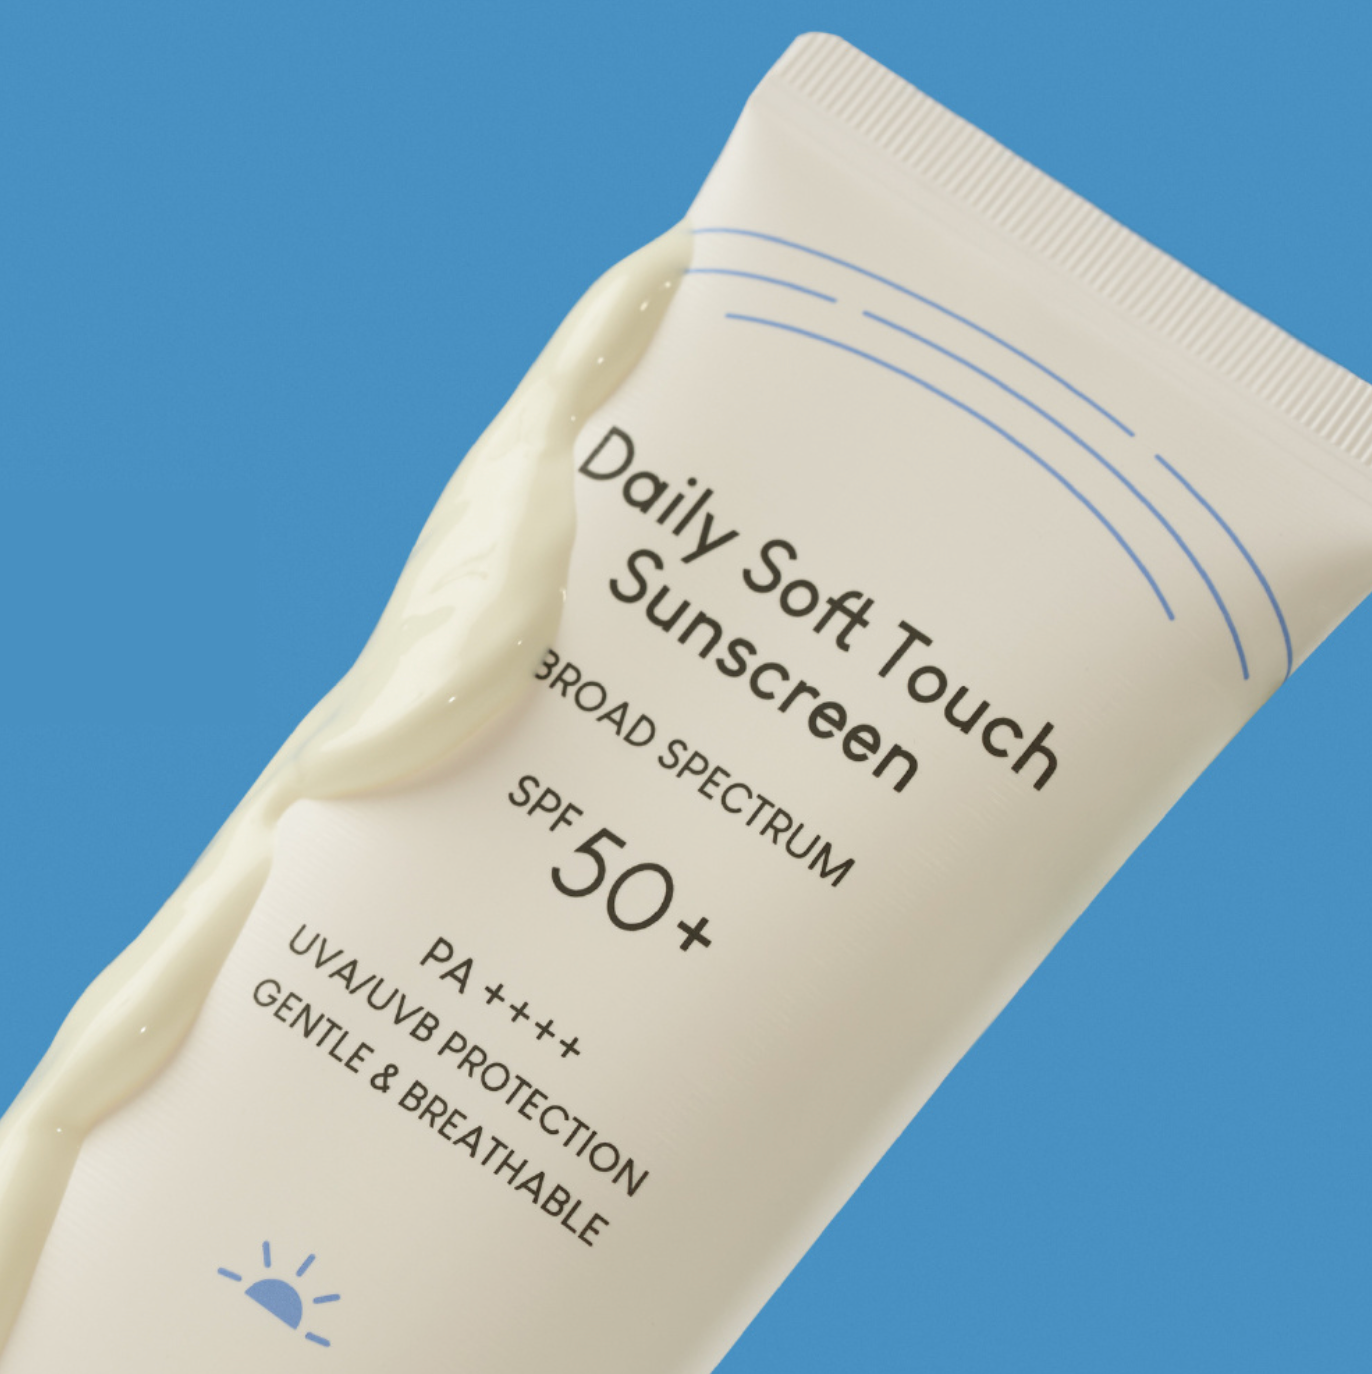 PURITO DAILY SOFT TOUCH SUNSCREEN (60ML)